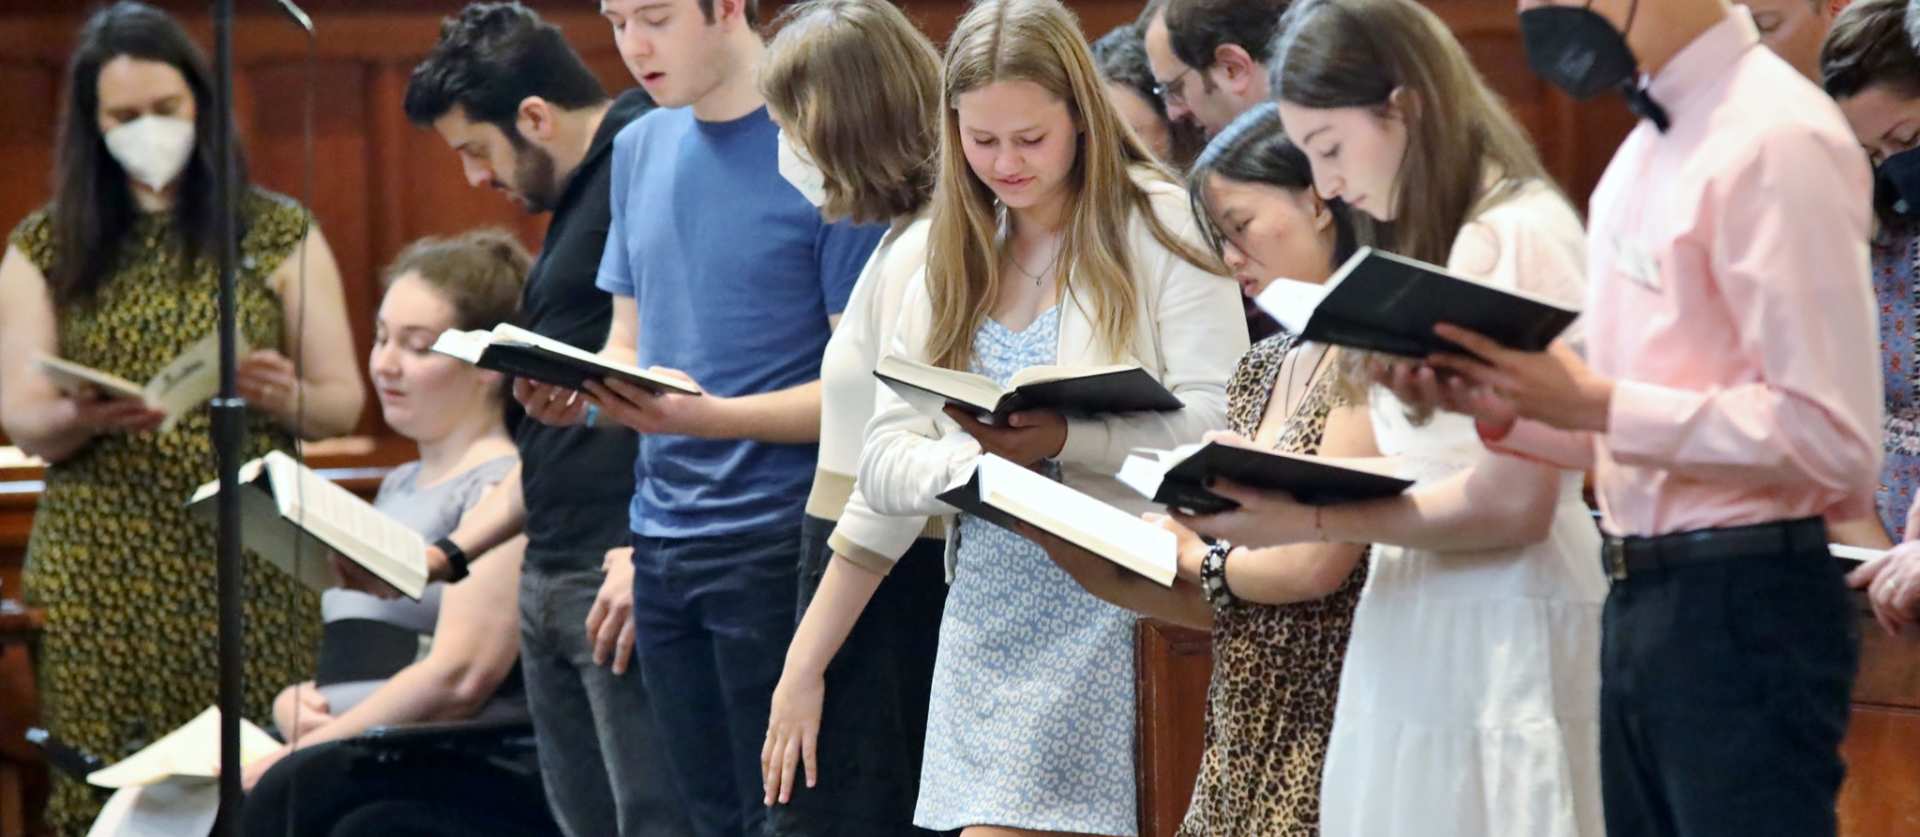 Youth Group members sing a hymn during worship